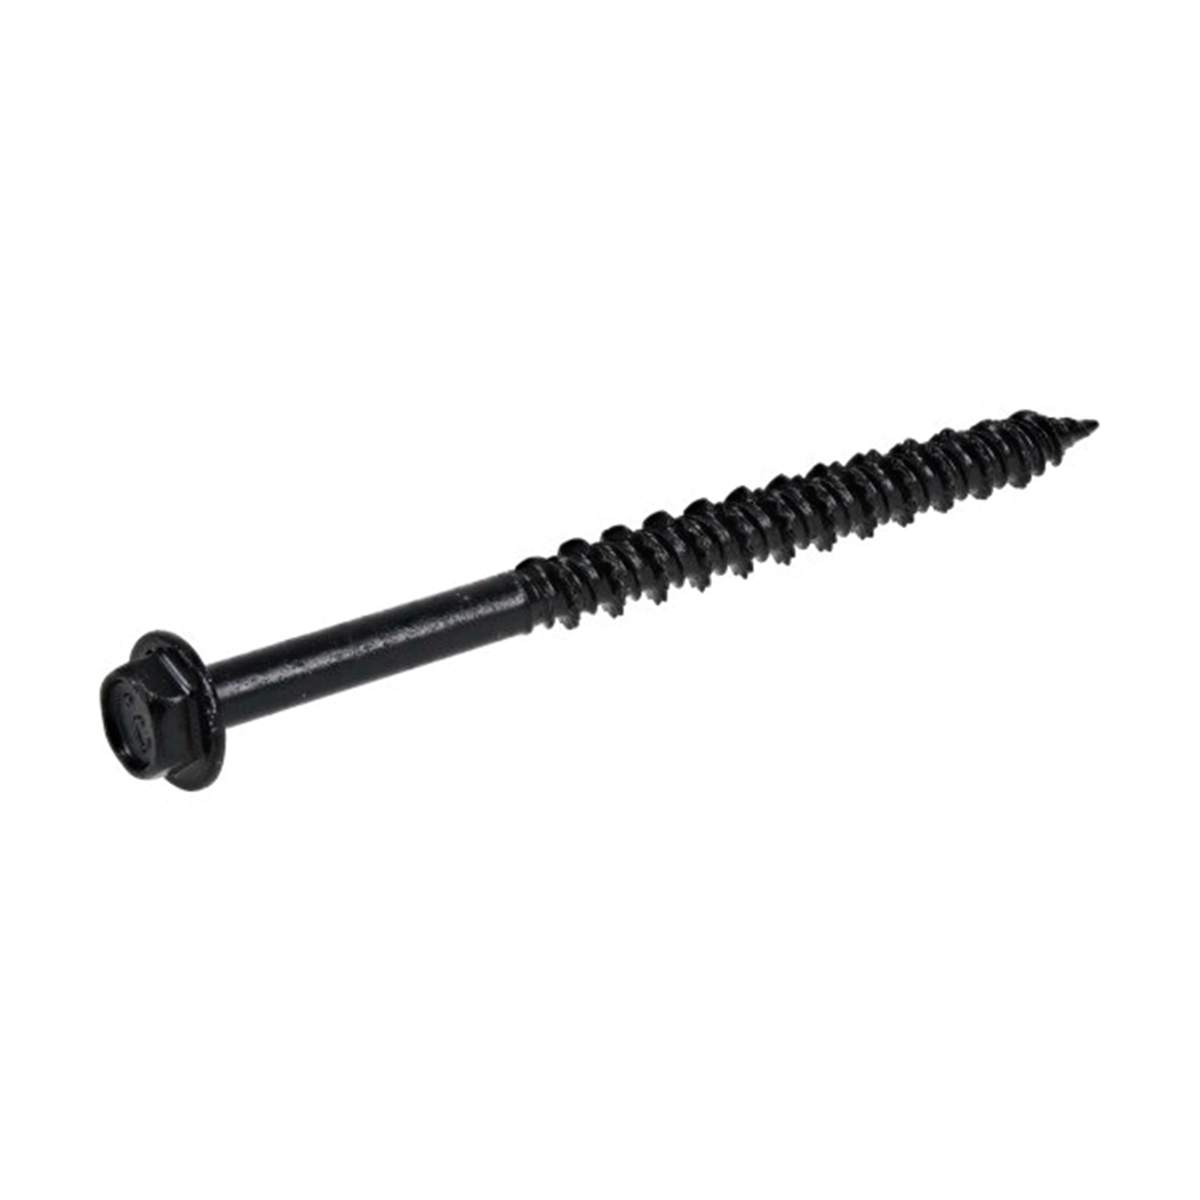 376578 Concrete Screw Anchor, 3/16 in Dia, 2-3/4 in L, Carbon Steel, Epoxy-Coated, 100/PK